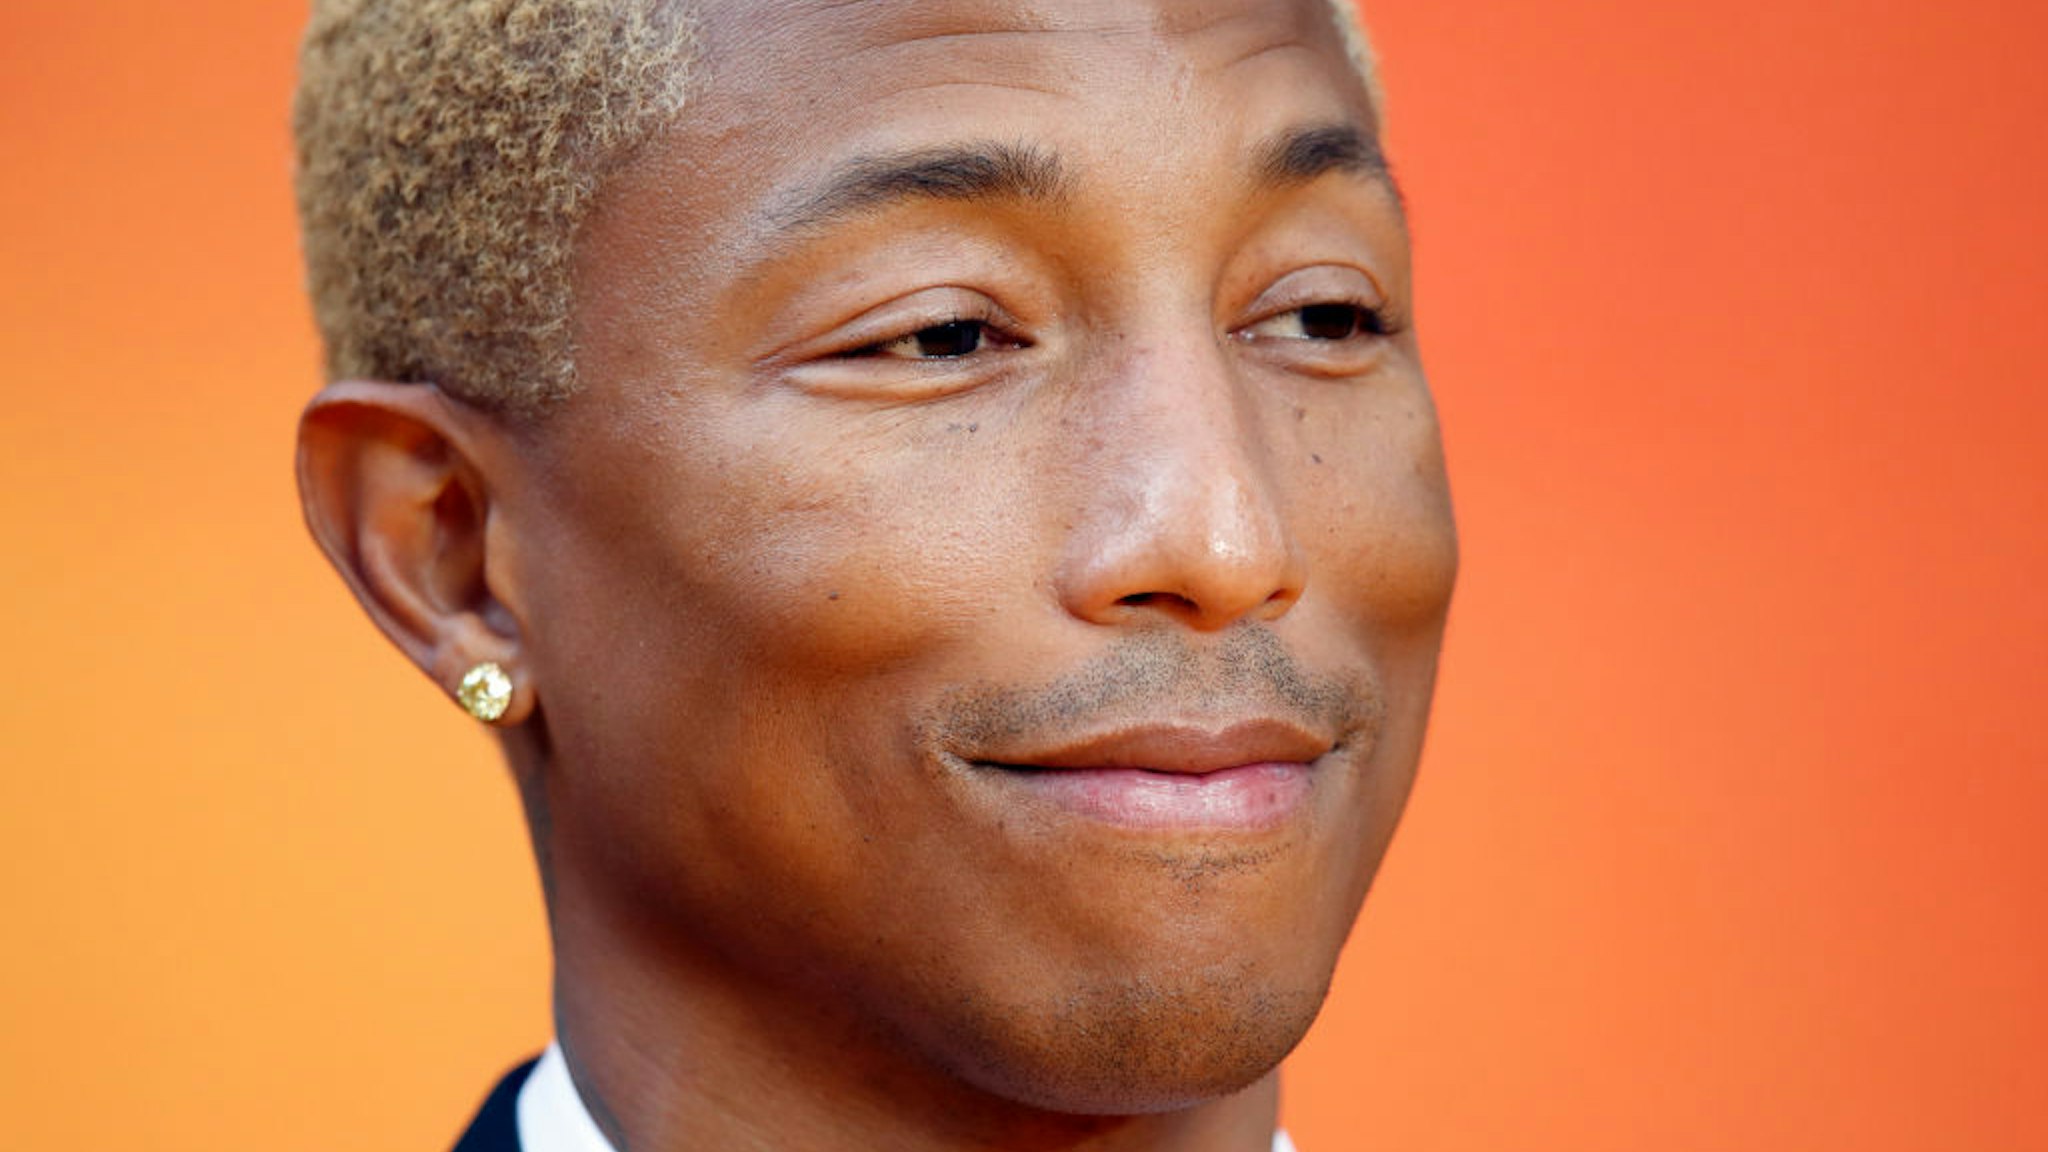 Pharrell Williams attends "The Lion King" European Premiere at Leicester Square on July 14, 2019 in London, England.